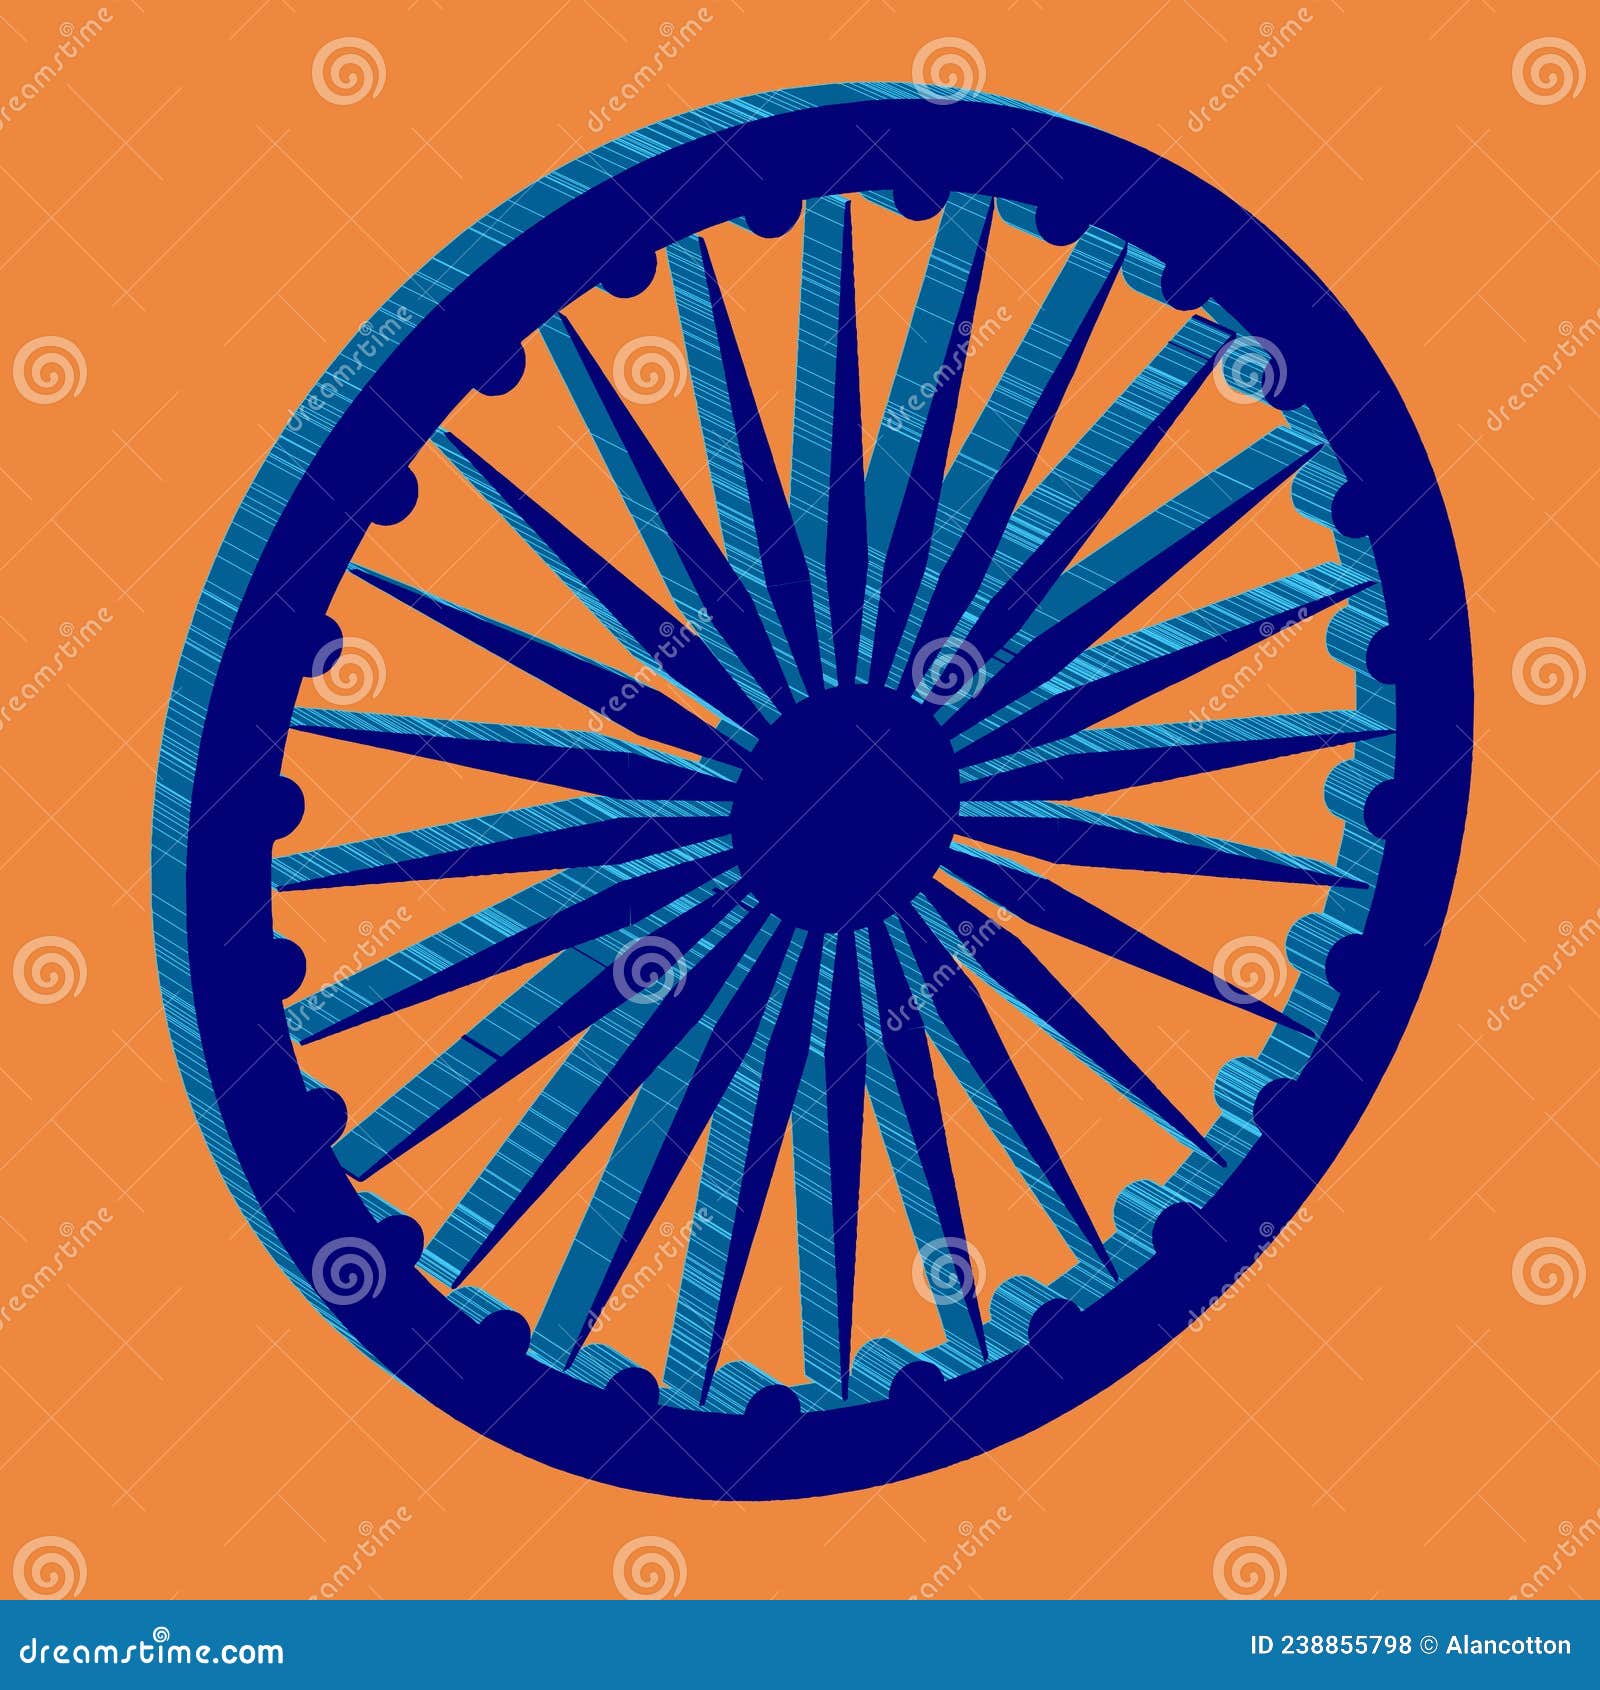 Share more than 199 flag of india drawing latest